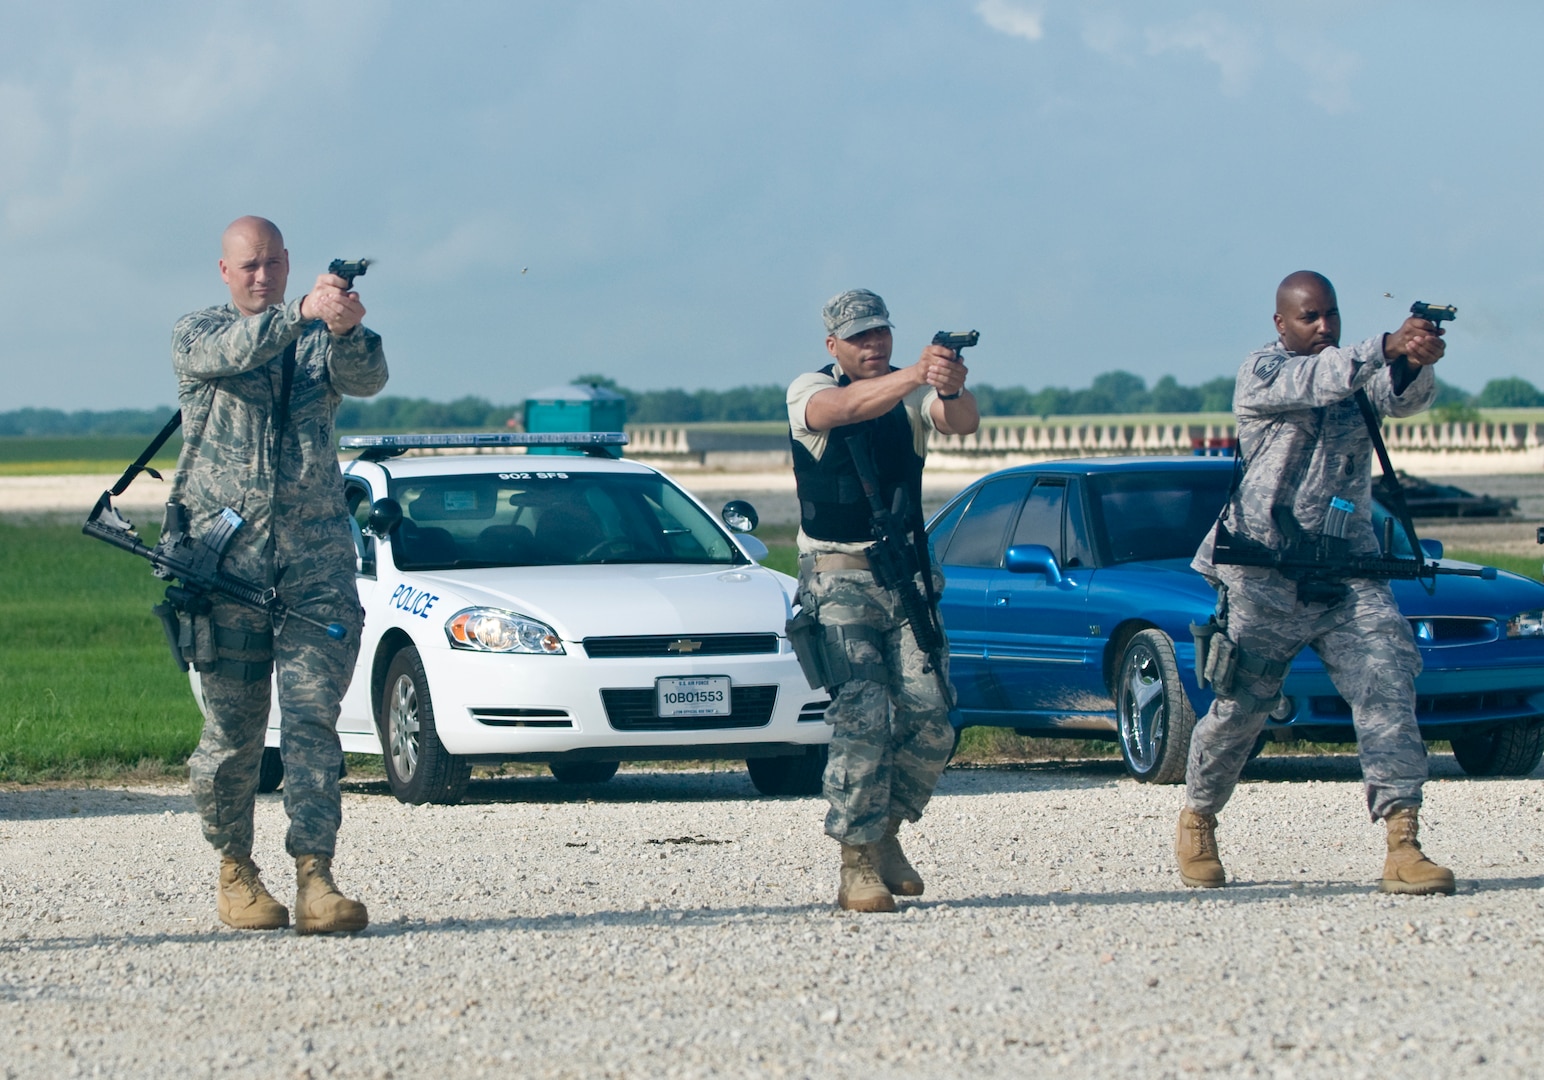 Tech. Sgt. Scott Schlasser, Staff Sgt. Teron Mobley , and MSgt. Joseph Thompson practice transitioning from one weapon to another and continuous fire at evalulator's training June 25 at Randolph Air Force Base, Texas.  (U.S. Air Force photo by Steve White)